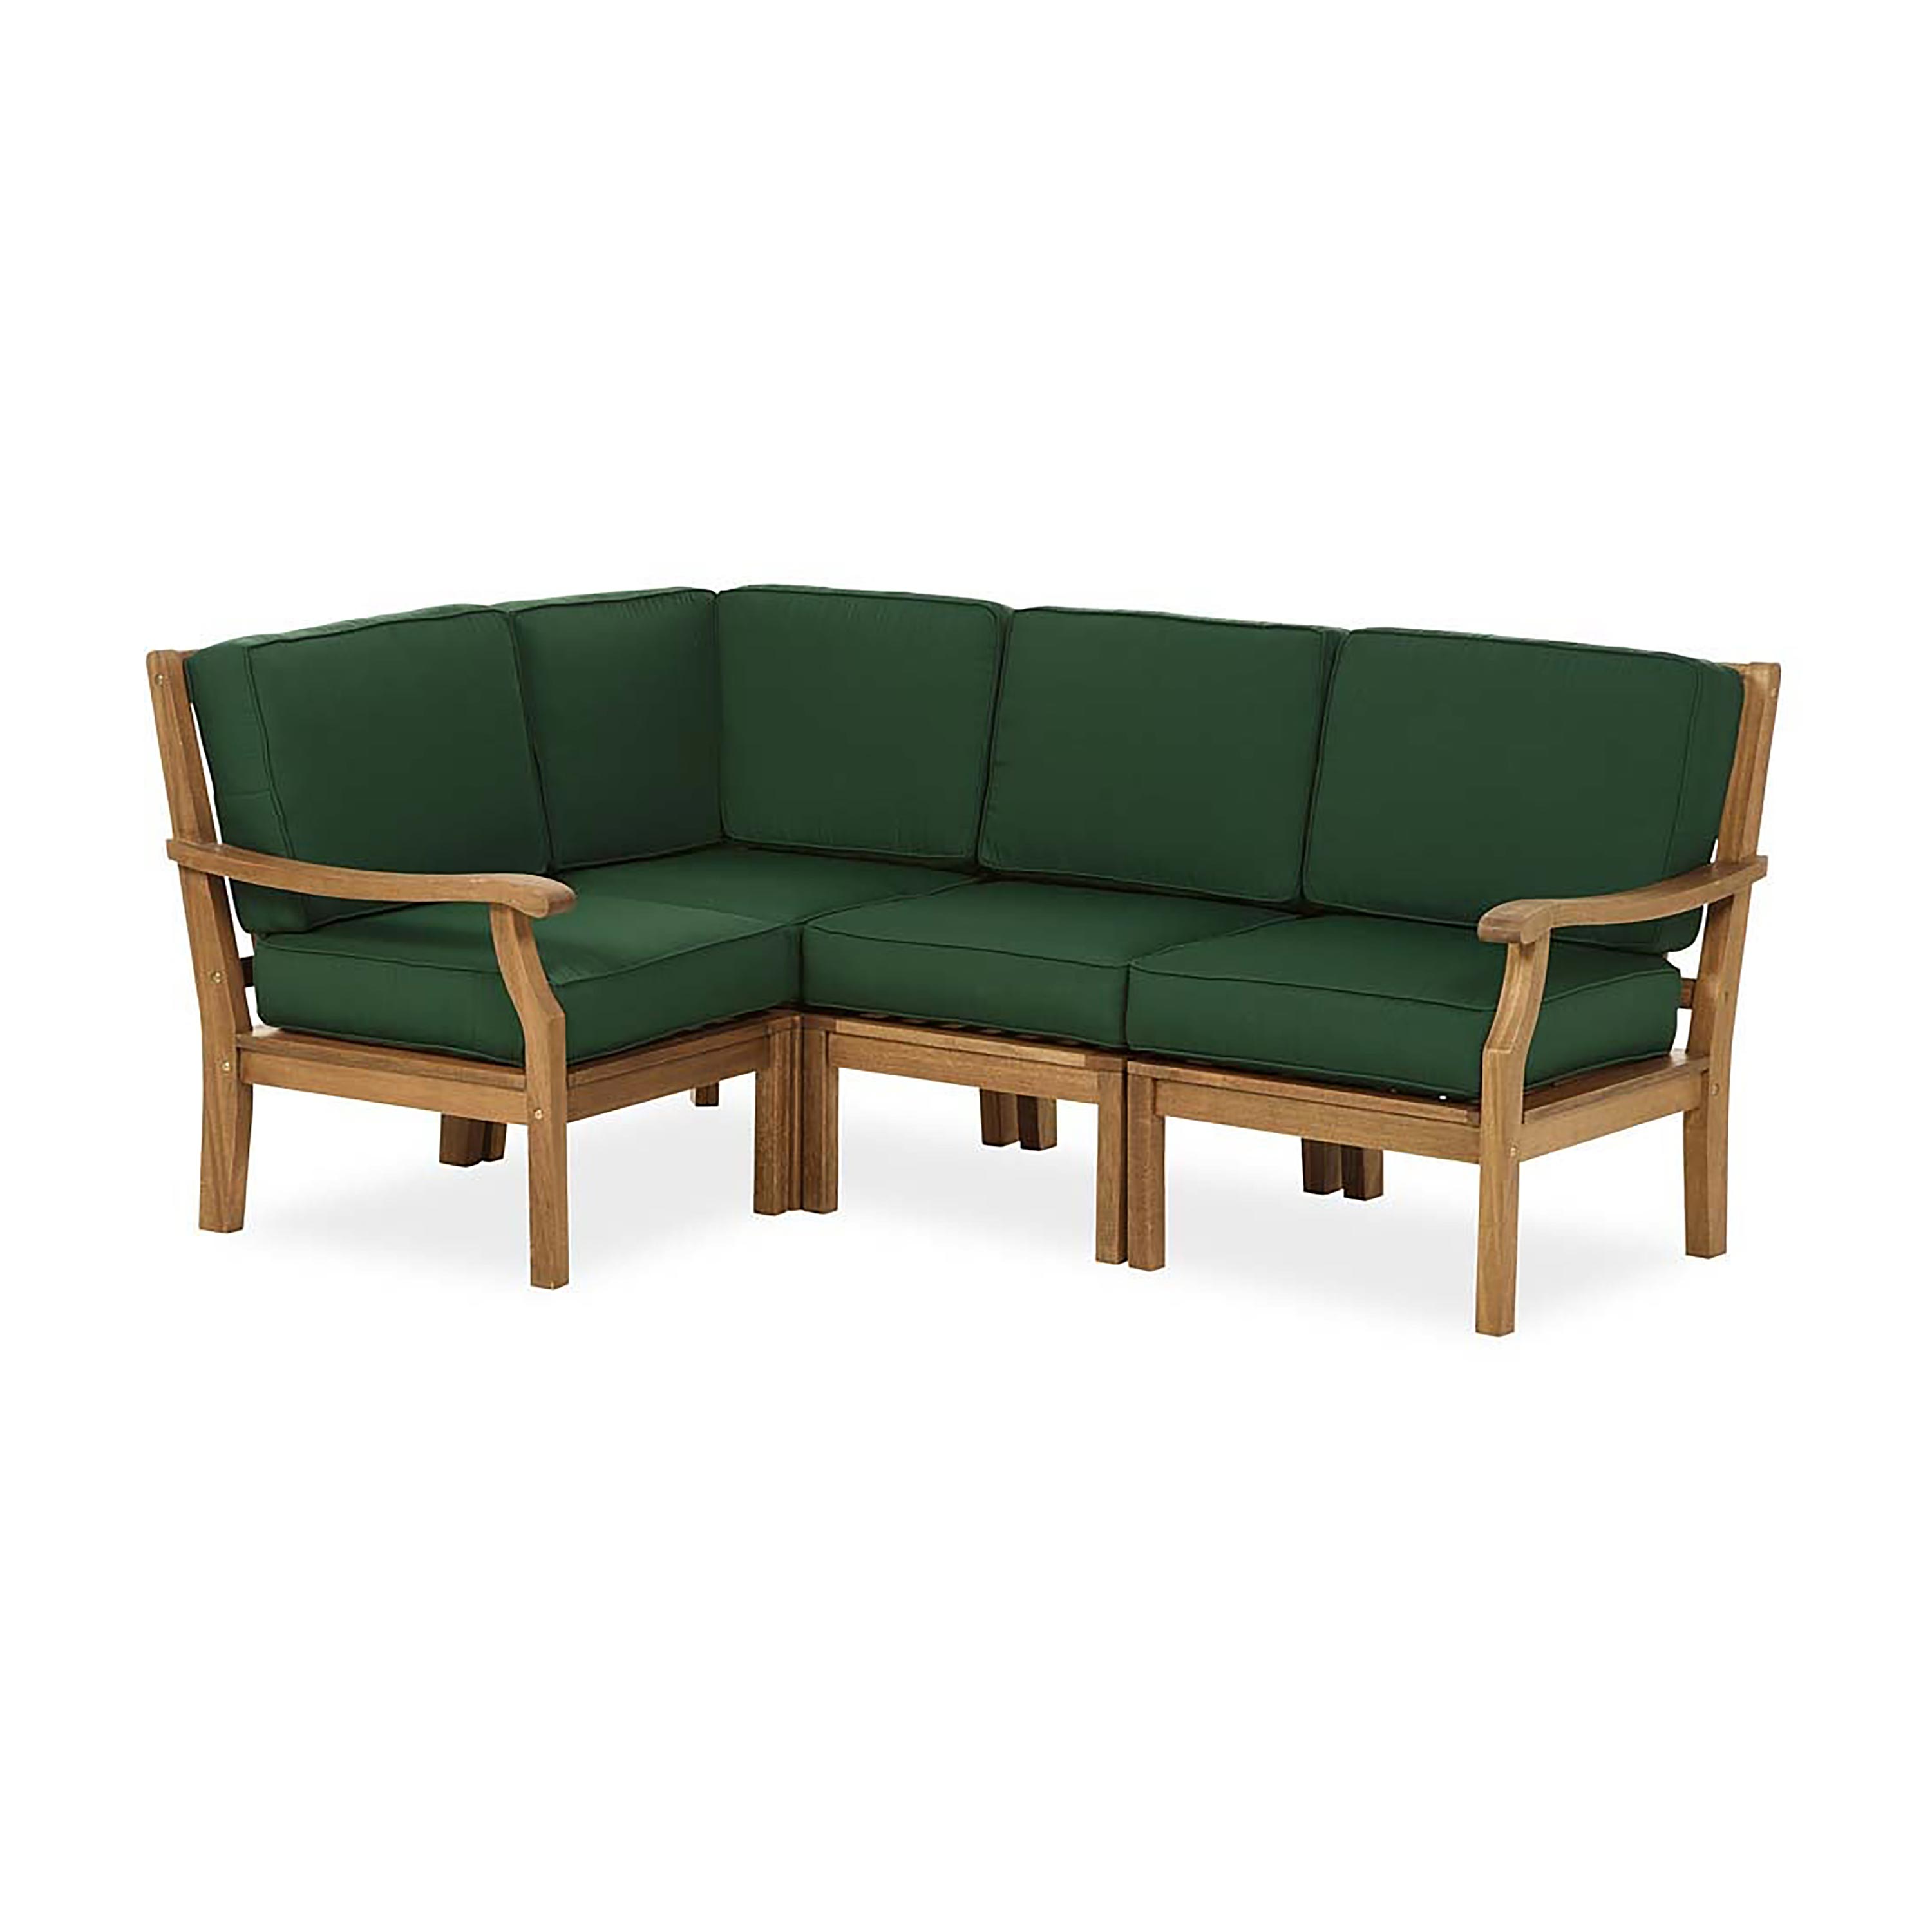 Claremont Eucalyptus Outdoor Sectional Seating with Cushions